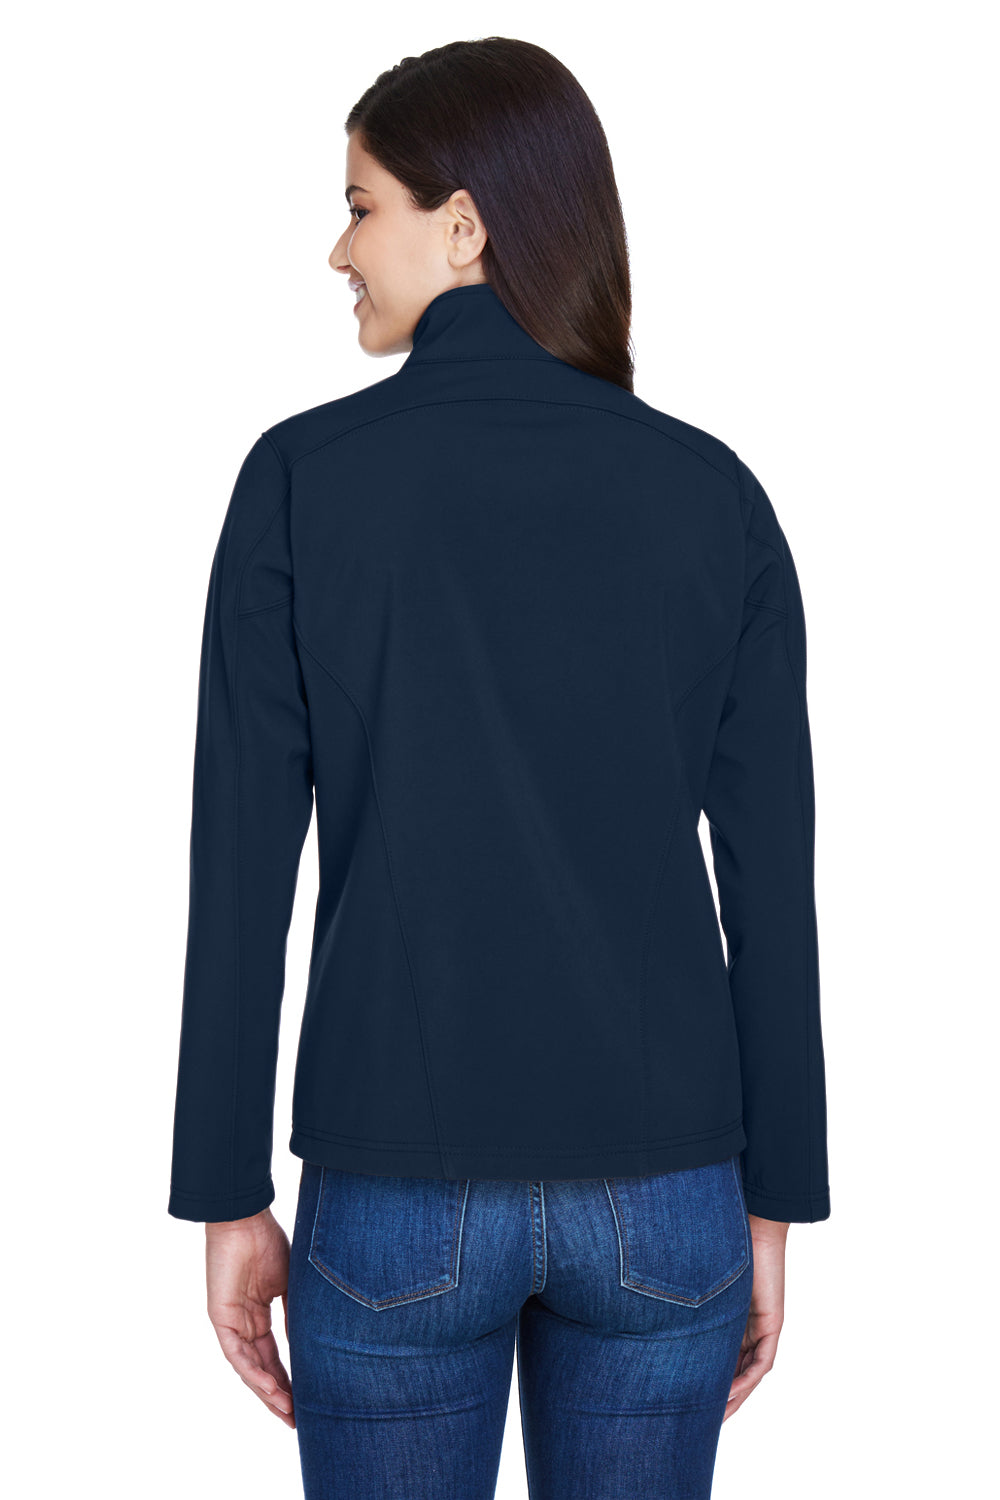 Core 365 78184 Womens Cruise Water Resistant Full Zip Jacket Navy Blue Back